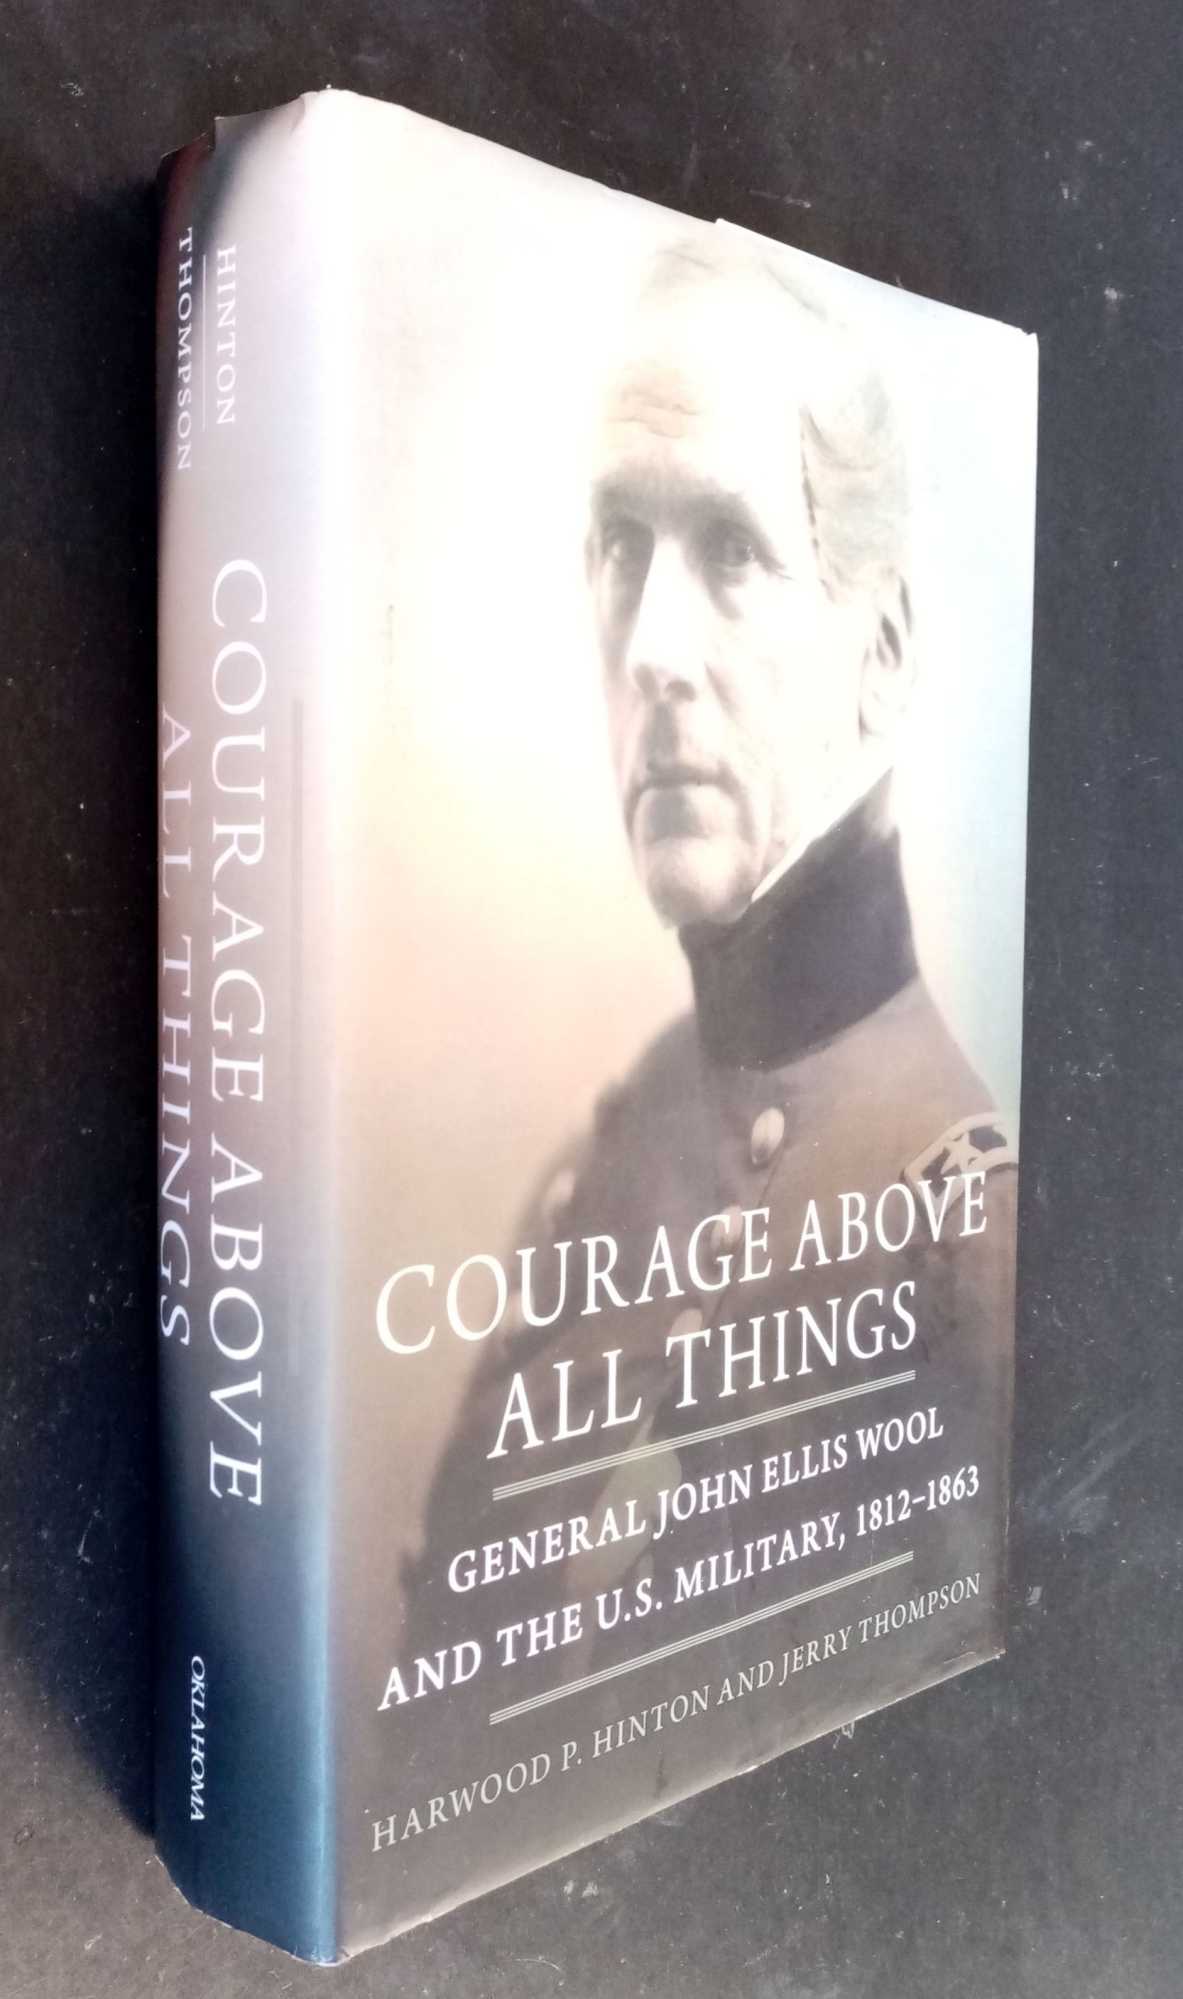 Harwood P Hinton - Courage Above All Things: General John Ellis Wool and the U.S. Military, 1812-1863